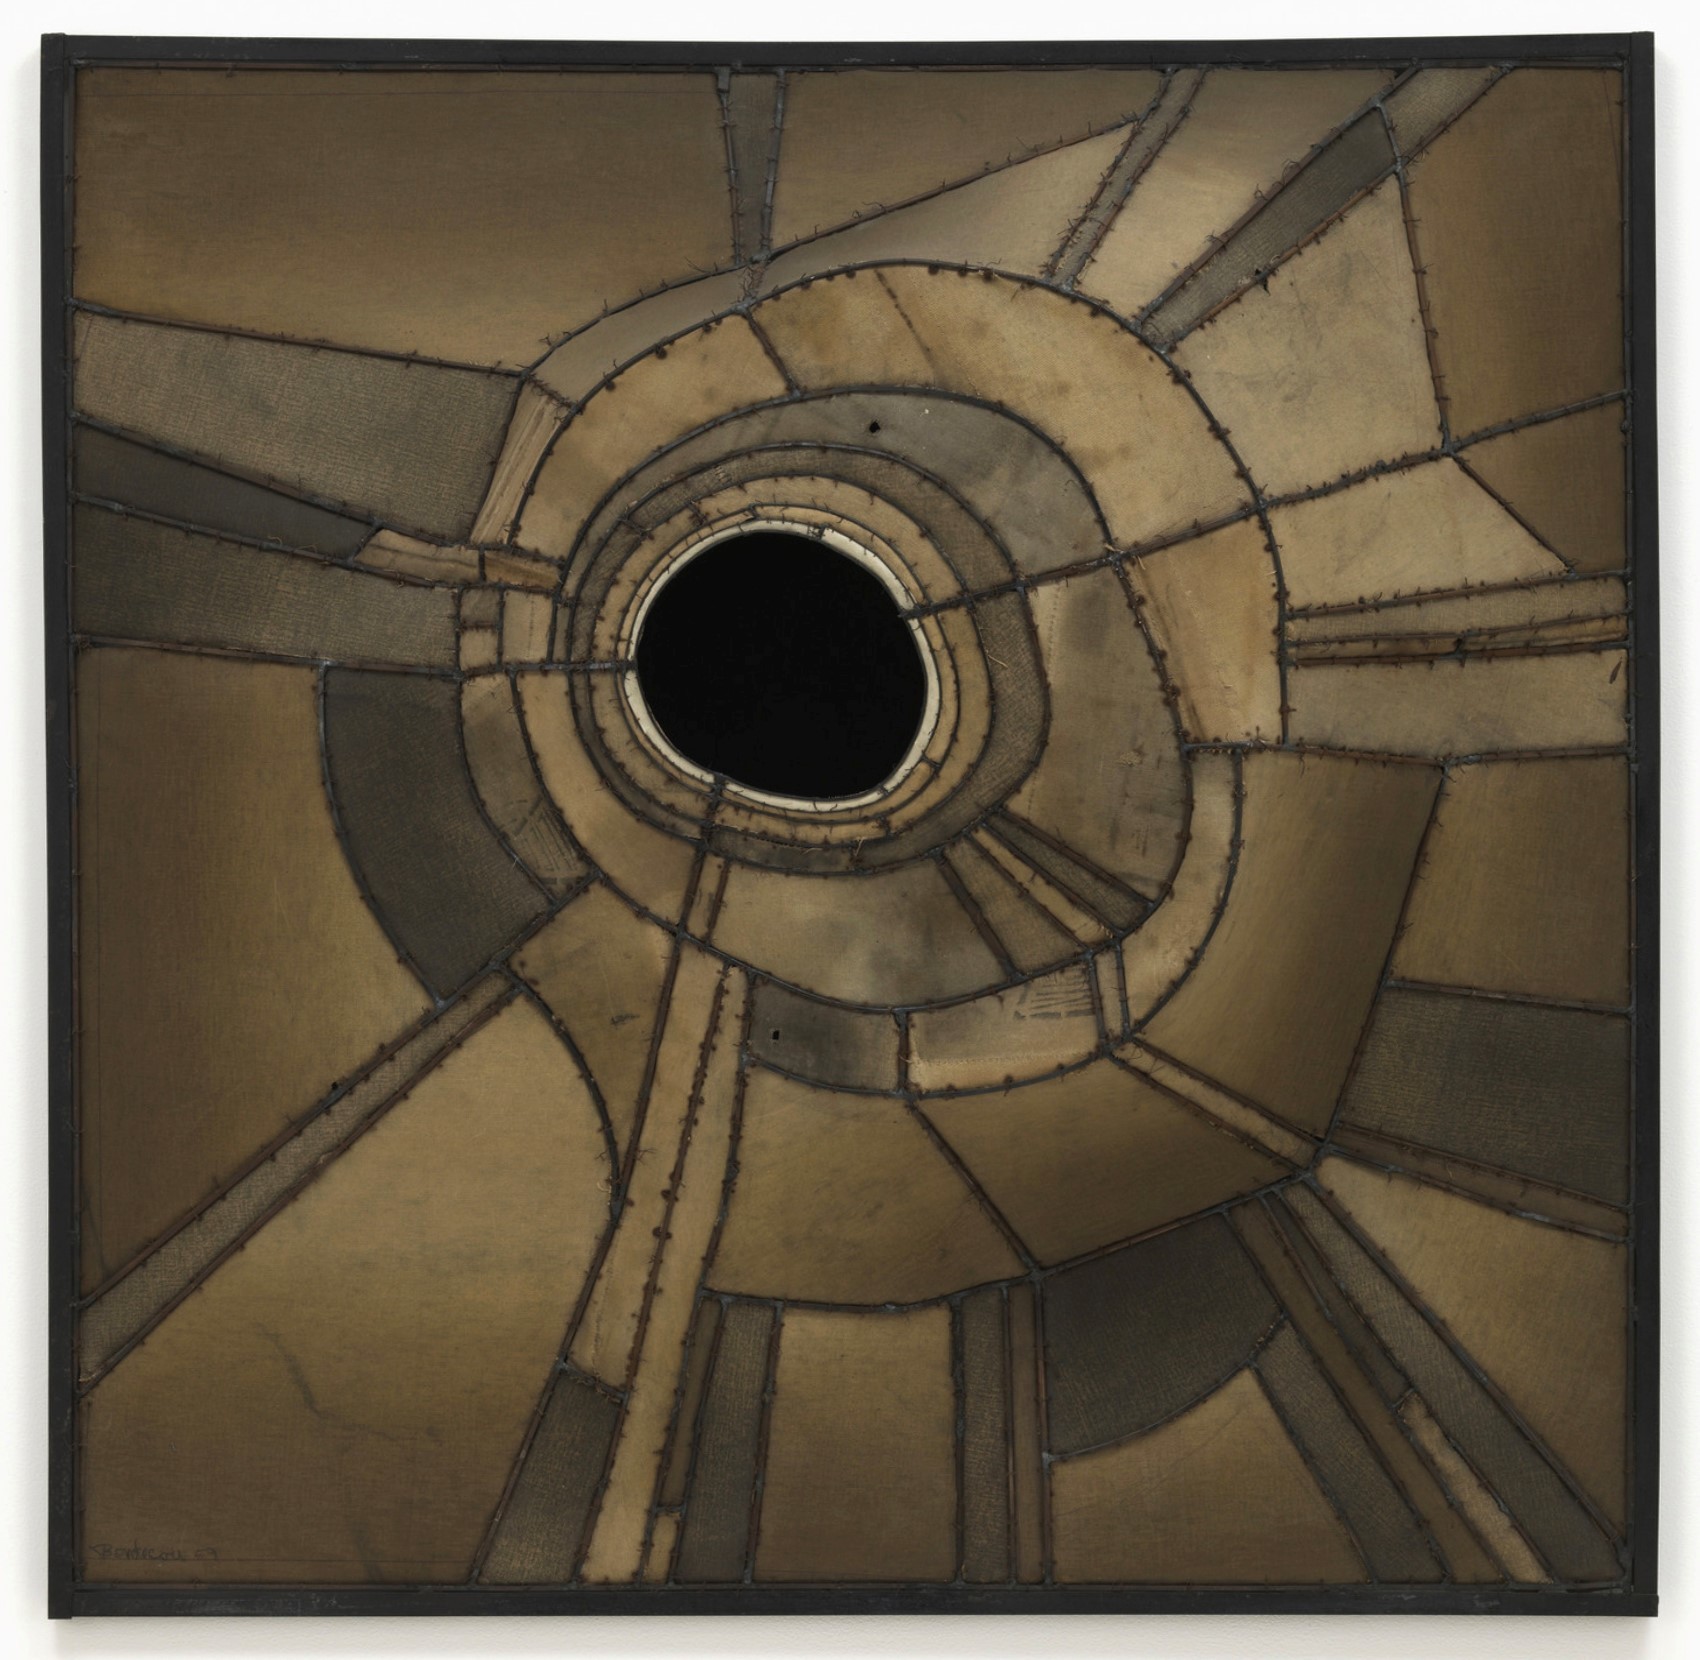  Lee Bontecou, ‘Untitled,’ 1959. Welded steel, canvas, black fabric, soot, and wire, 58 1/8 by 58 1/2 by 17 3⁄8in. (147.5 by 148.5 by 44cm). The Museum of Modern Art, New York, NY. Gift of Mr. and Mrs. Arnold H. Maremont (2.1960). © Lee Bontecou 